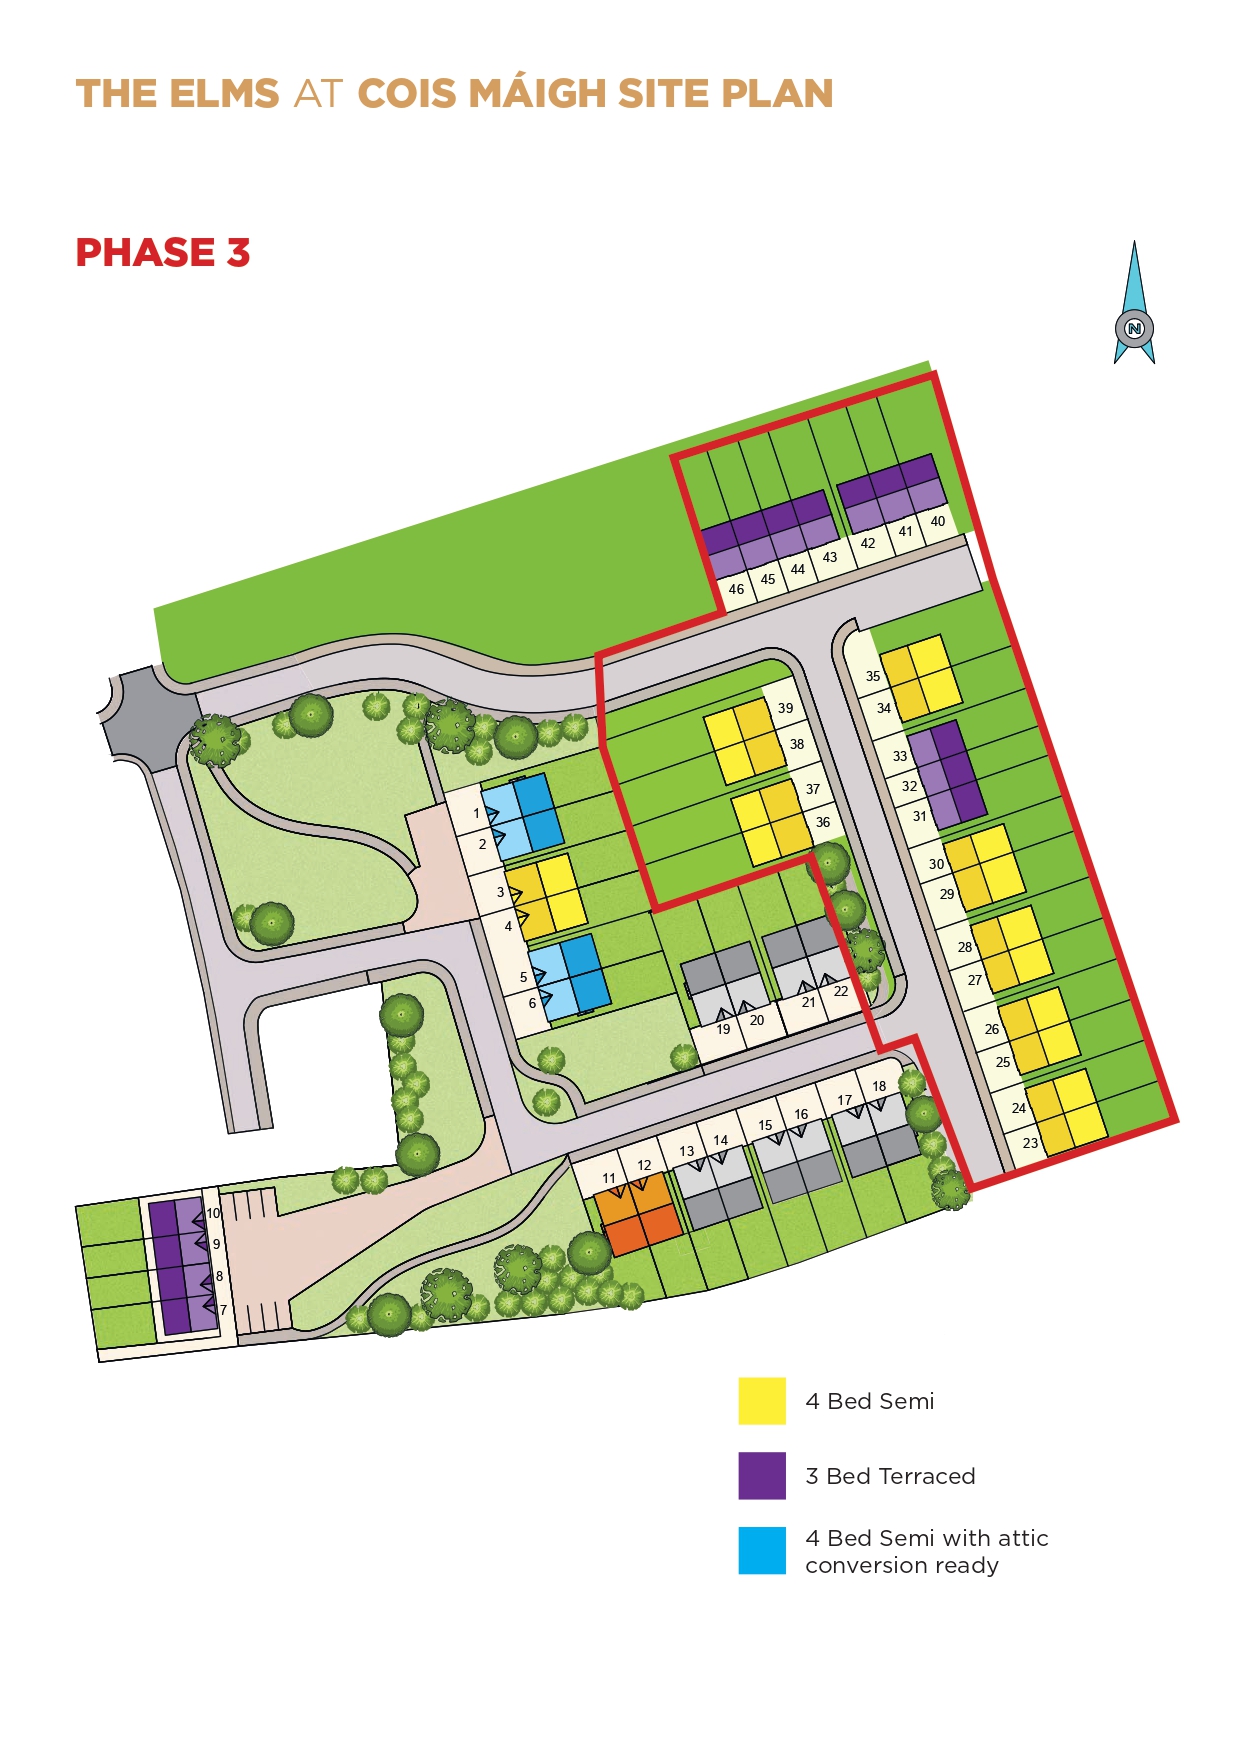 The Elms at Cois Maigh Site Plan